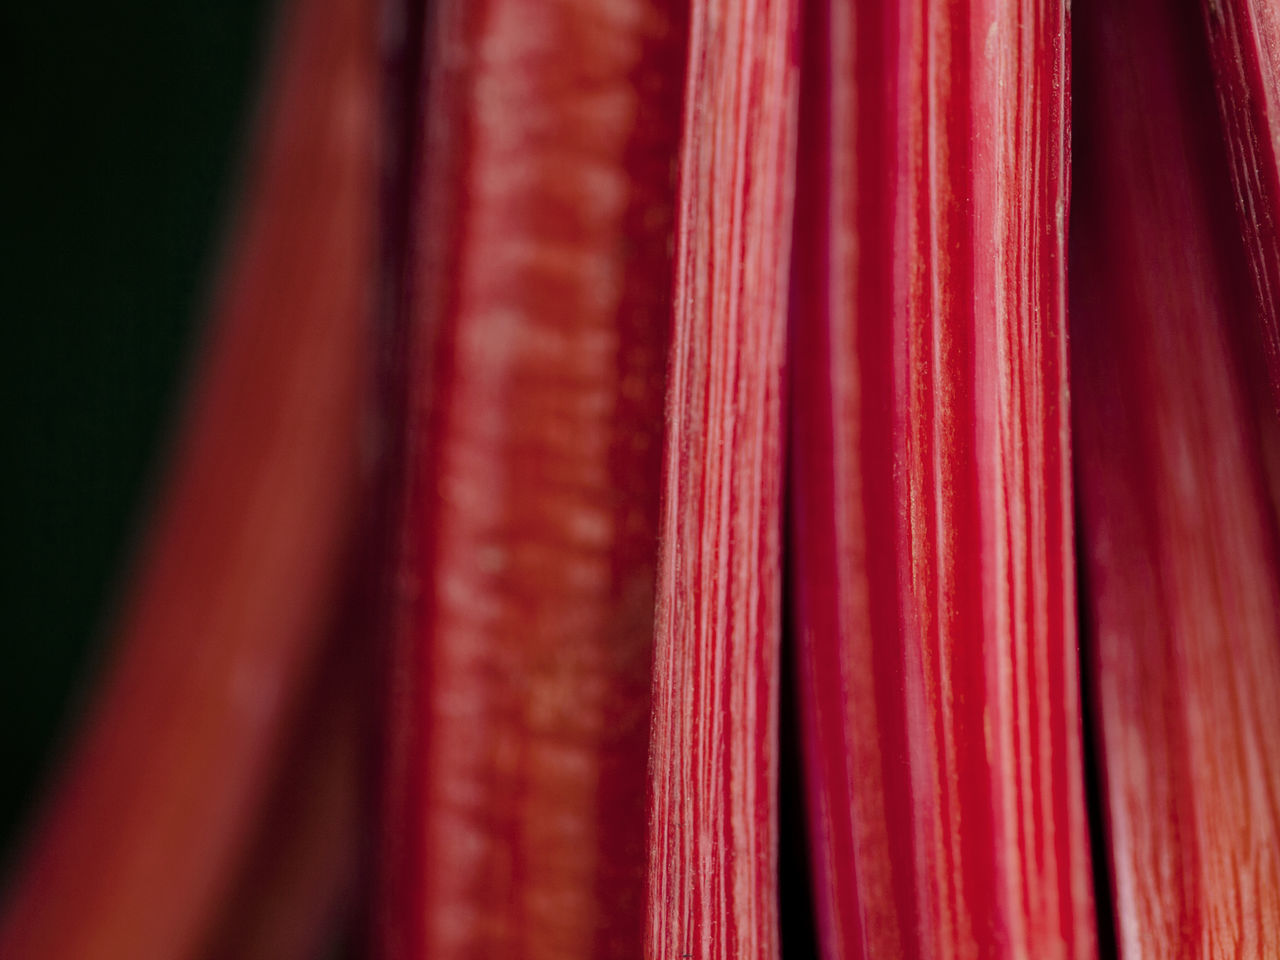 Extreme close-up of rhubarb